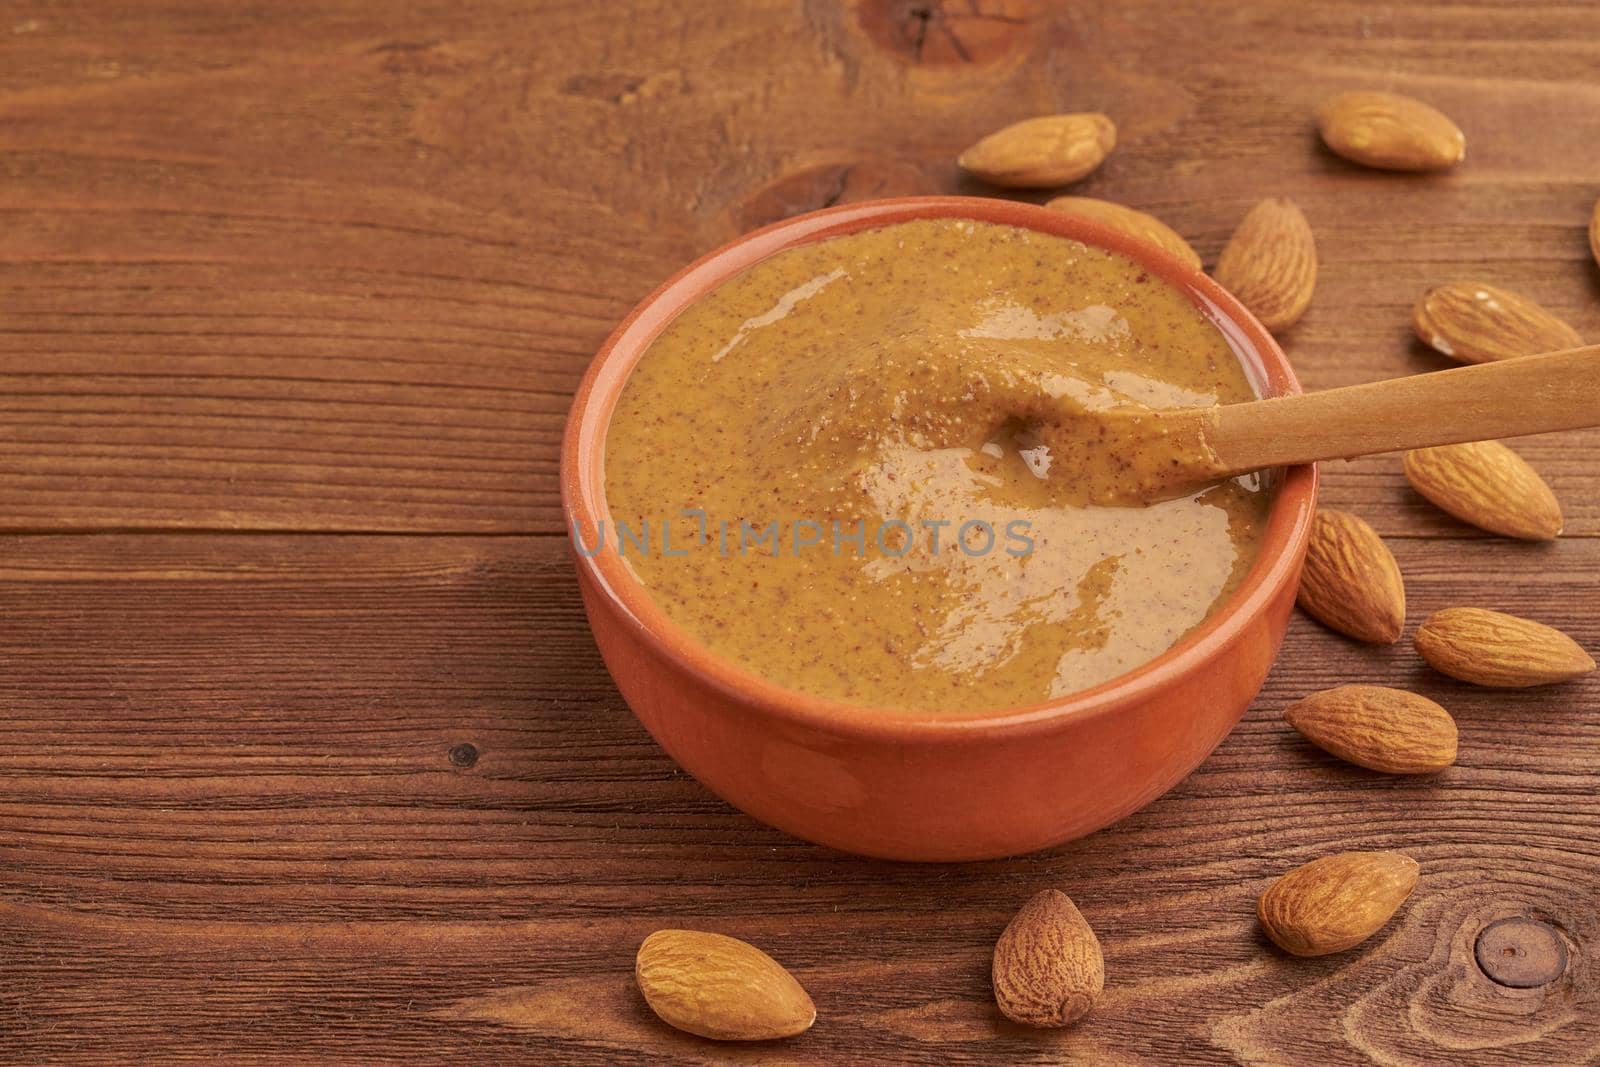 almond butter, raw food paste made from grinding almonds into nut butter, crunchy and stir, dark brown wooden table, copy space